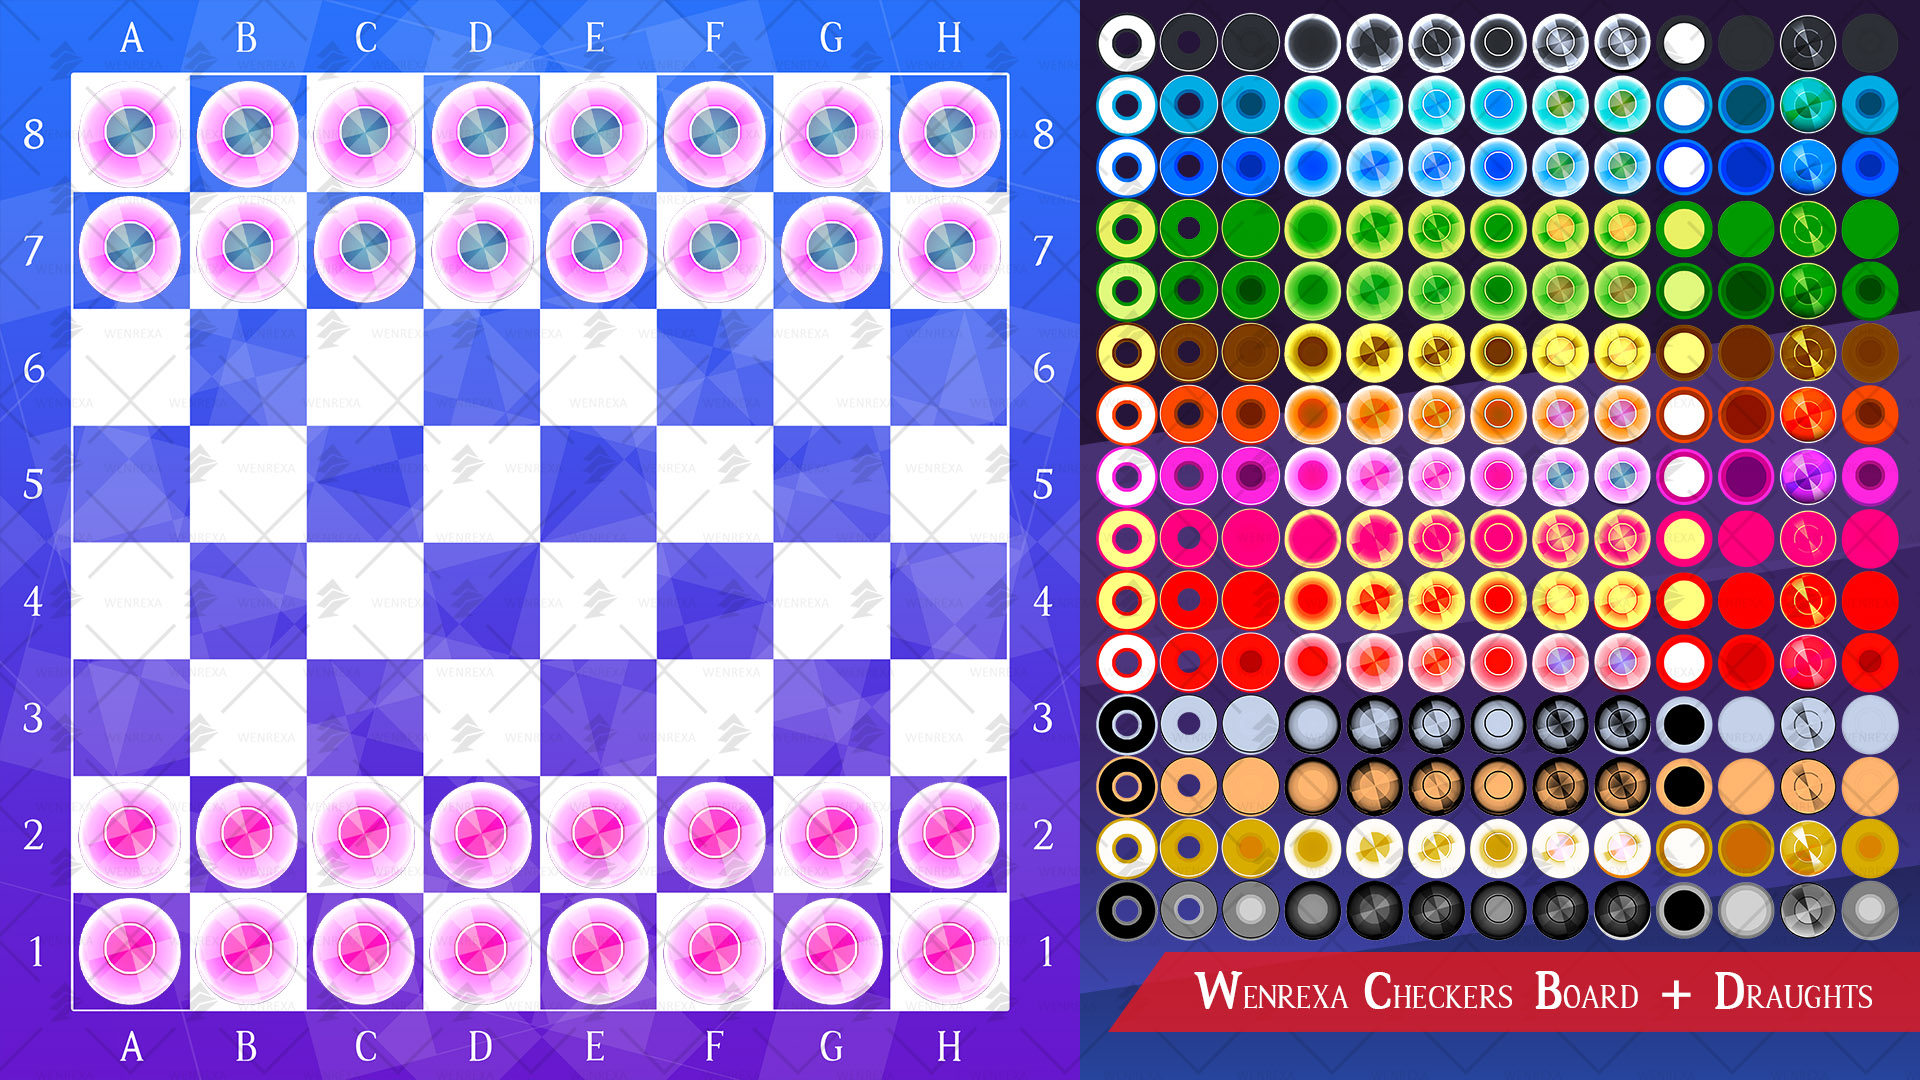 Assets: Checkers Board + Draughts